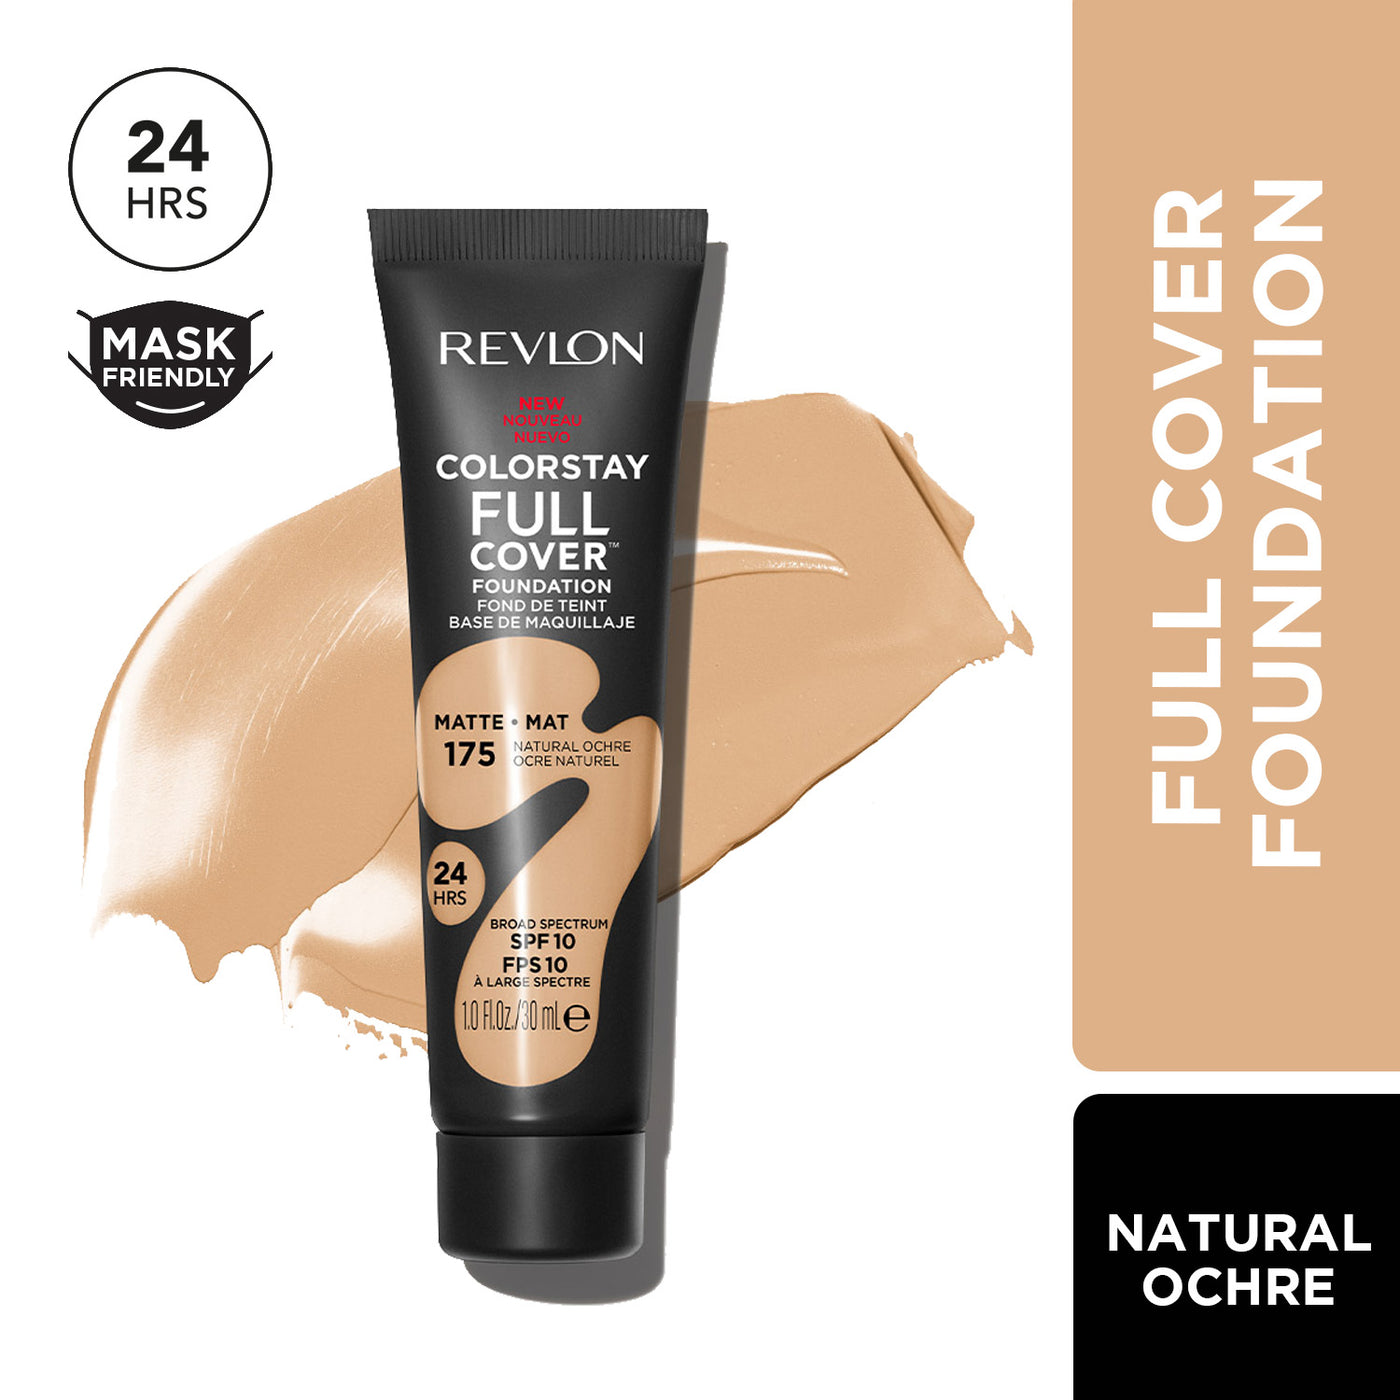 Revlon ColorStay Full Coverage Foundation in India